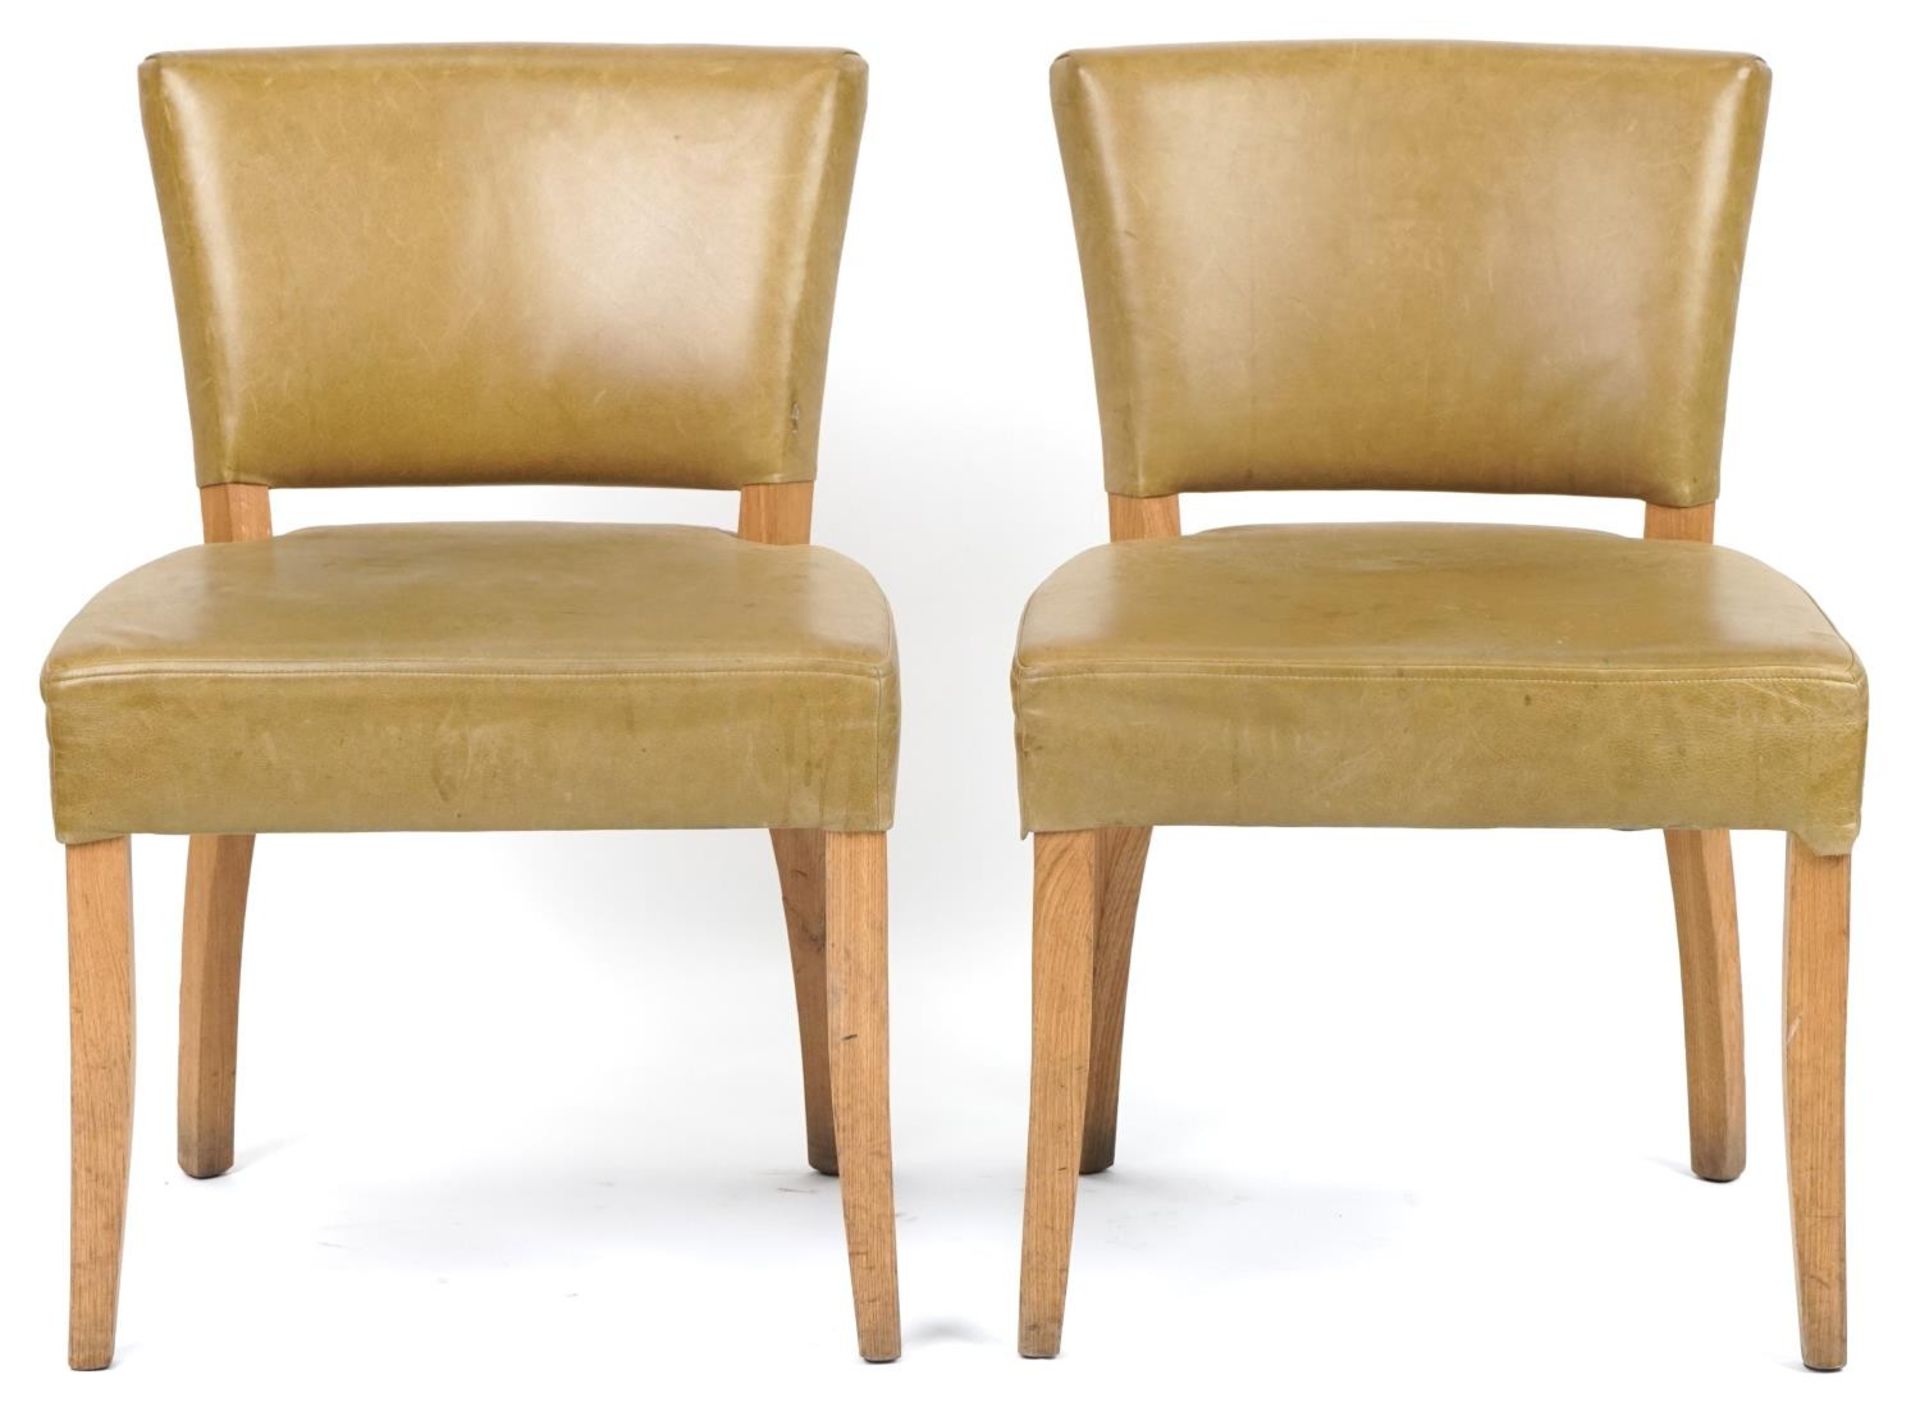 Wych Wood Design, pair of contemporary light oak chairs with green leather upholstery, 87cm high - Image 2 of 5